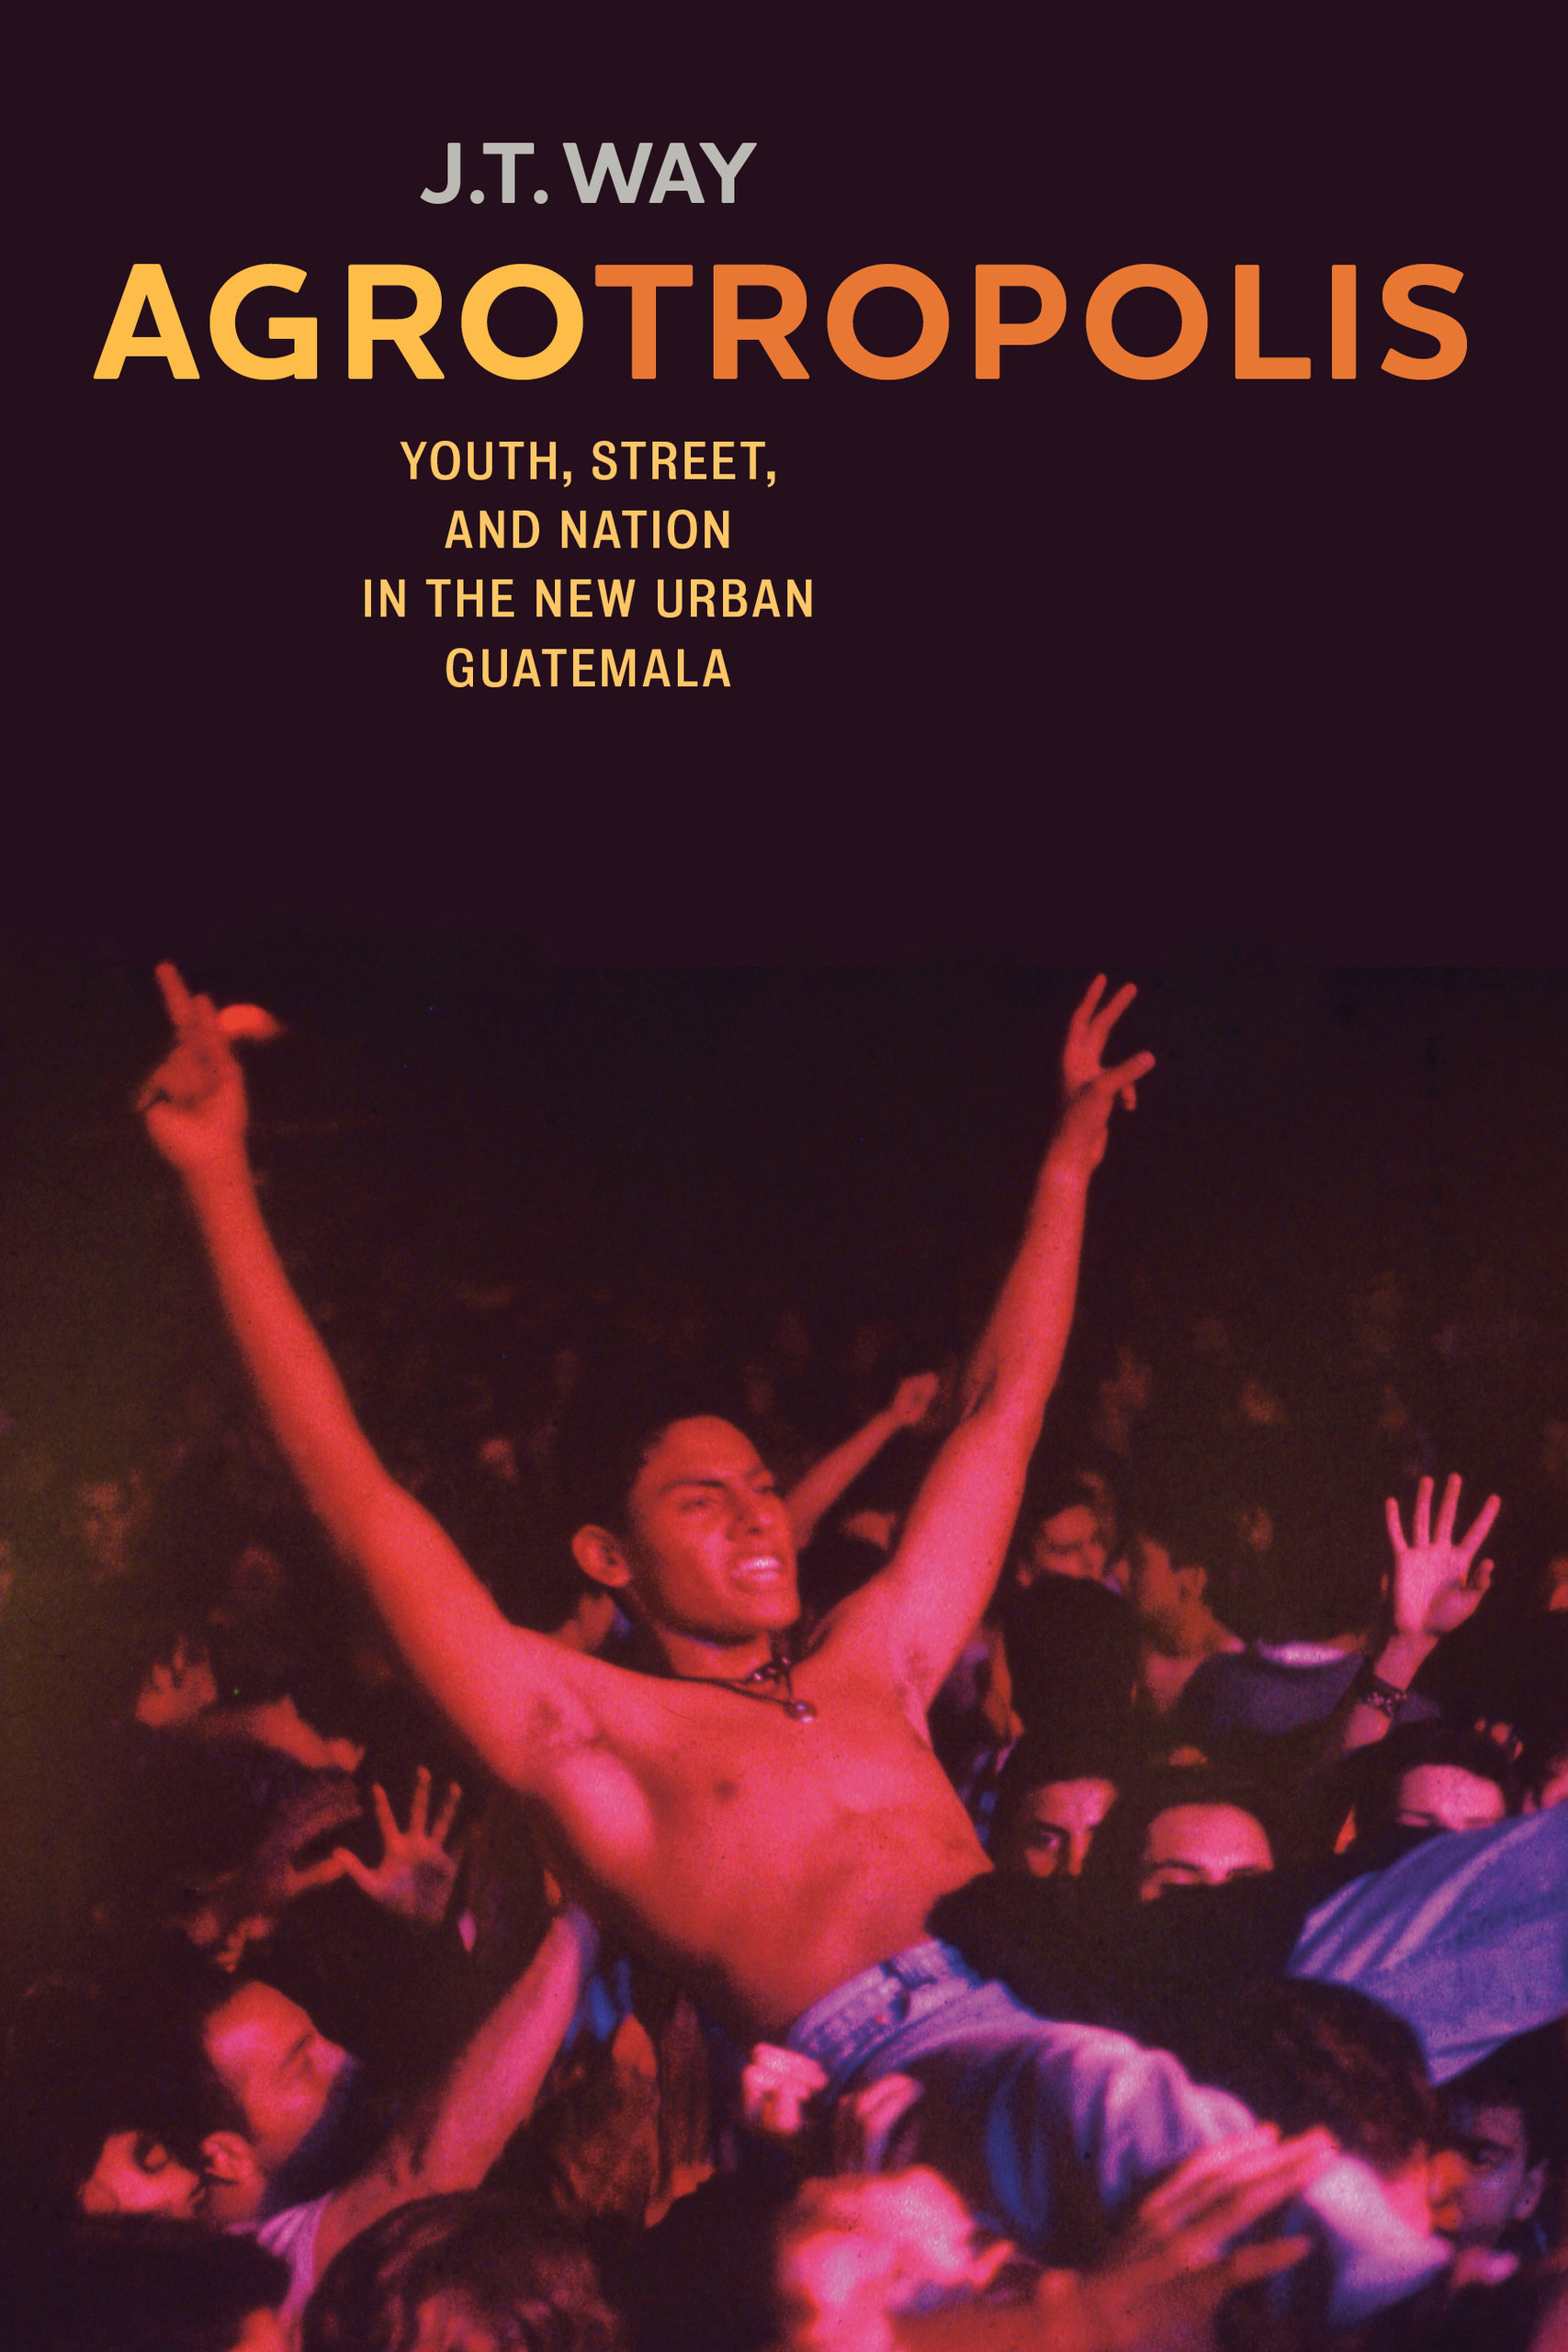 Agrotropolis: Youth, Street, and Nation in the New Urban Guatemala